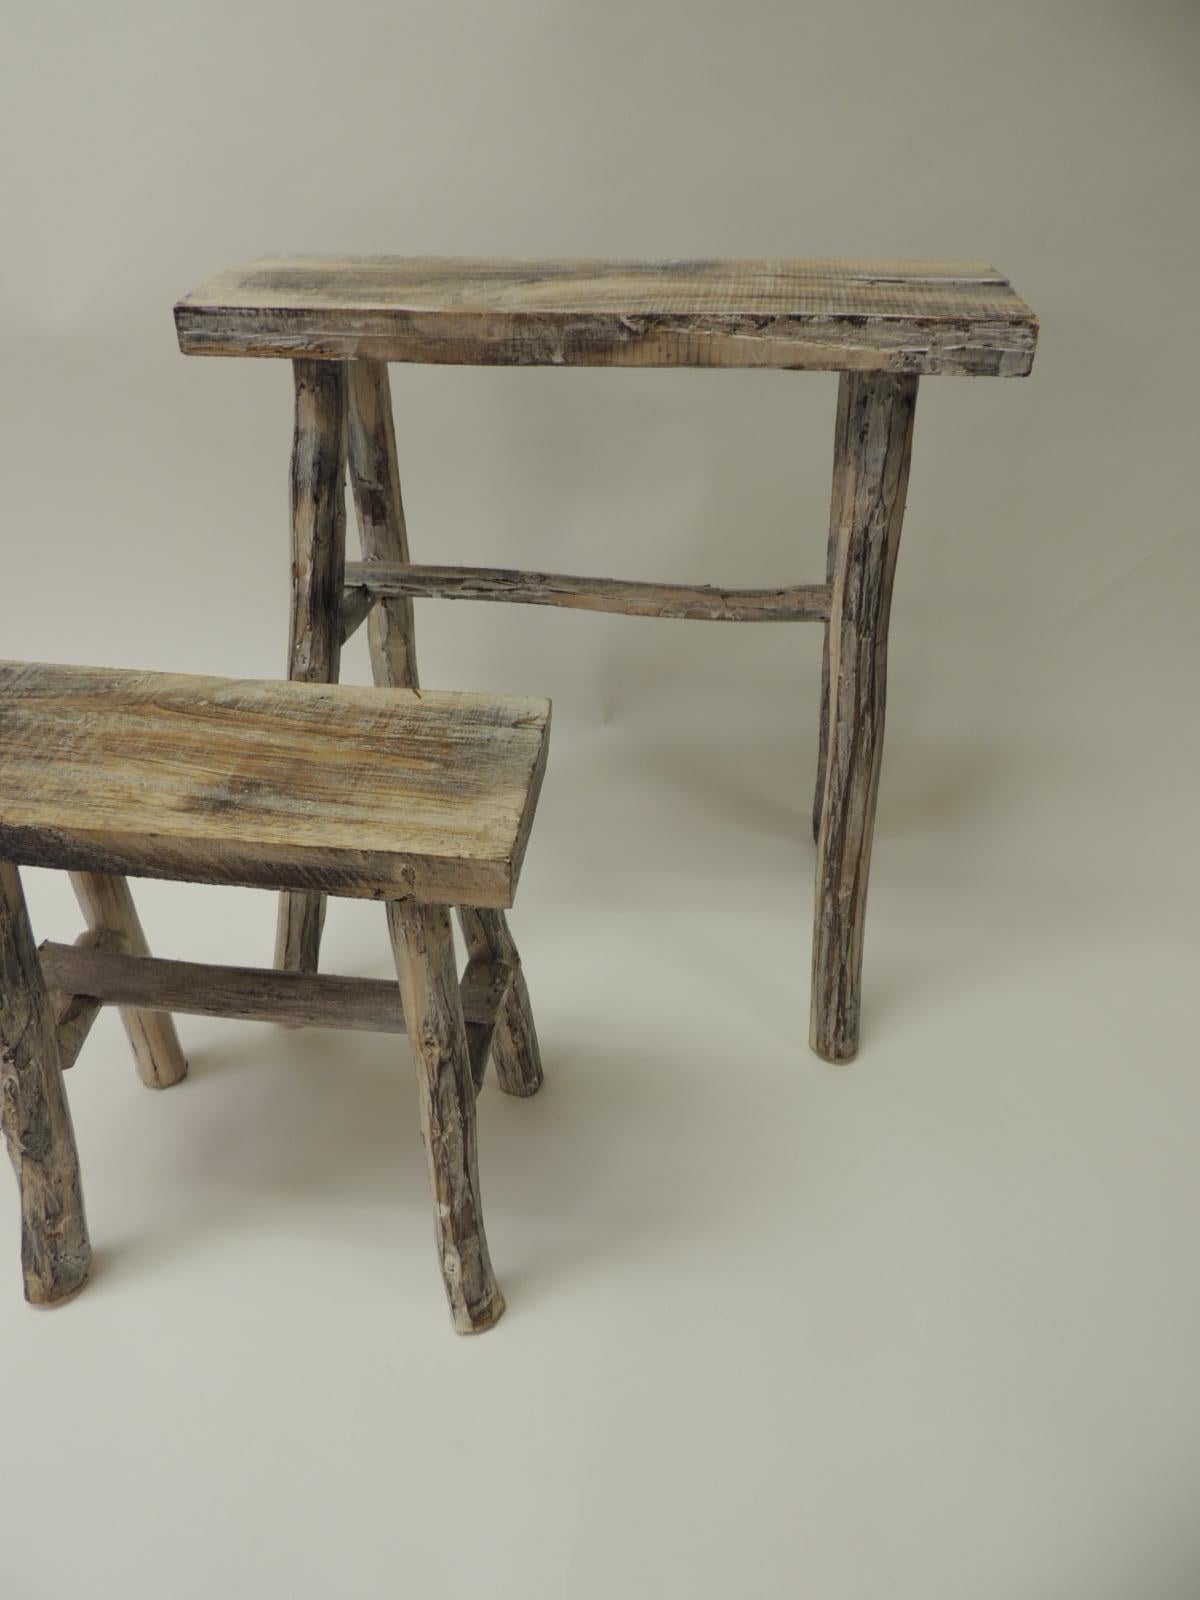 Rustic Pair of vintage Asian white washed rubbed wood painted nesting side tables/stands.
Nice and sturdy side tables, stands, great for bathroom decor, candles, planters.
Tall: 15.5 x 10 x 17 H
Short: 11 x 6.5 x 11 H.